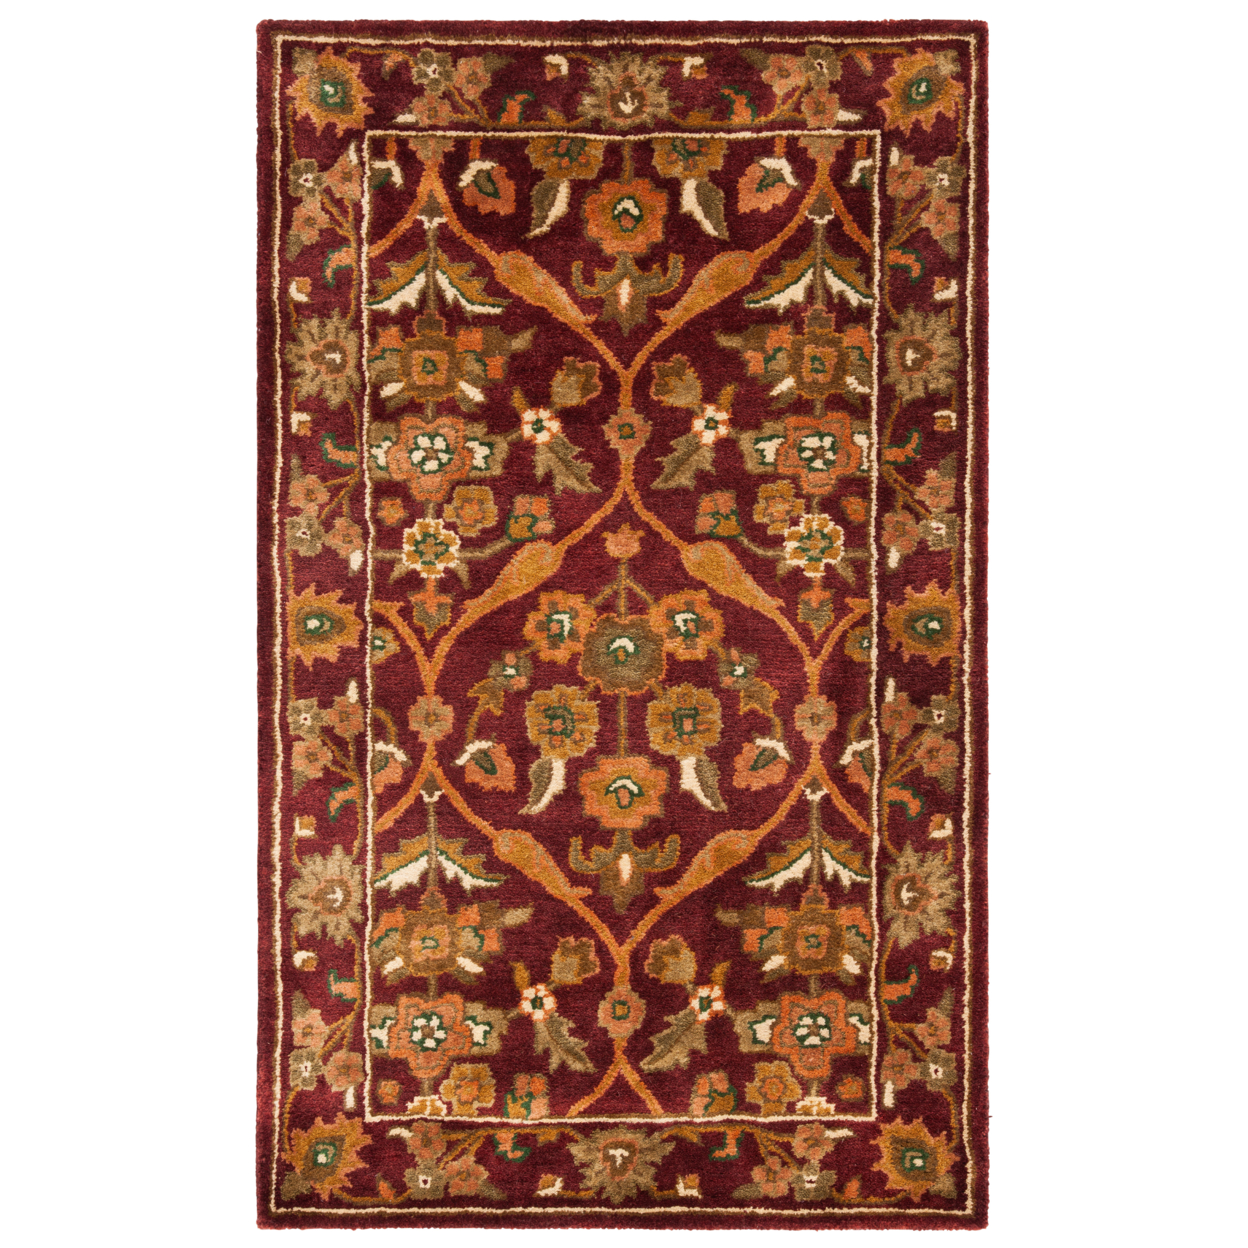 SAFAVIEH Antiquity AT51A Handmade Wine / Gold Rug - 4' 6 X 6' 6 Oval